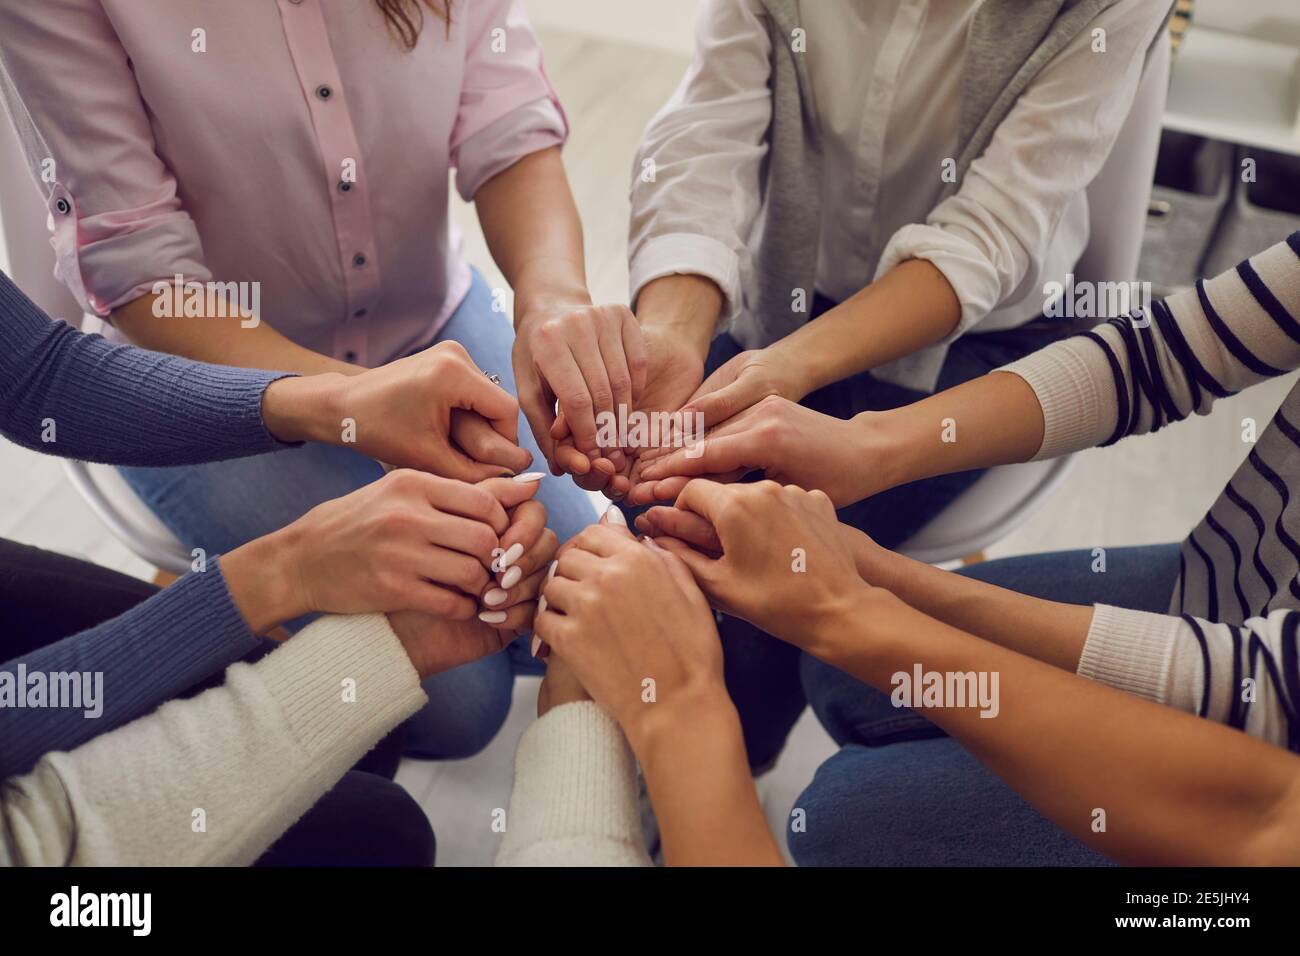 Group of women sitting together and holding hands, demonstrating support and solidarity Stock Photo